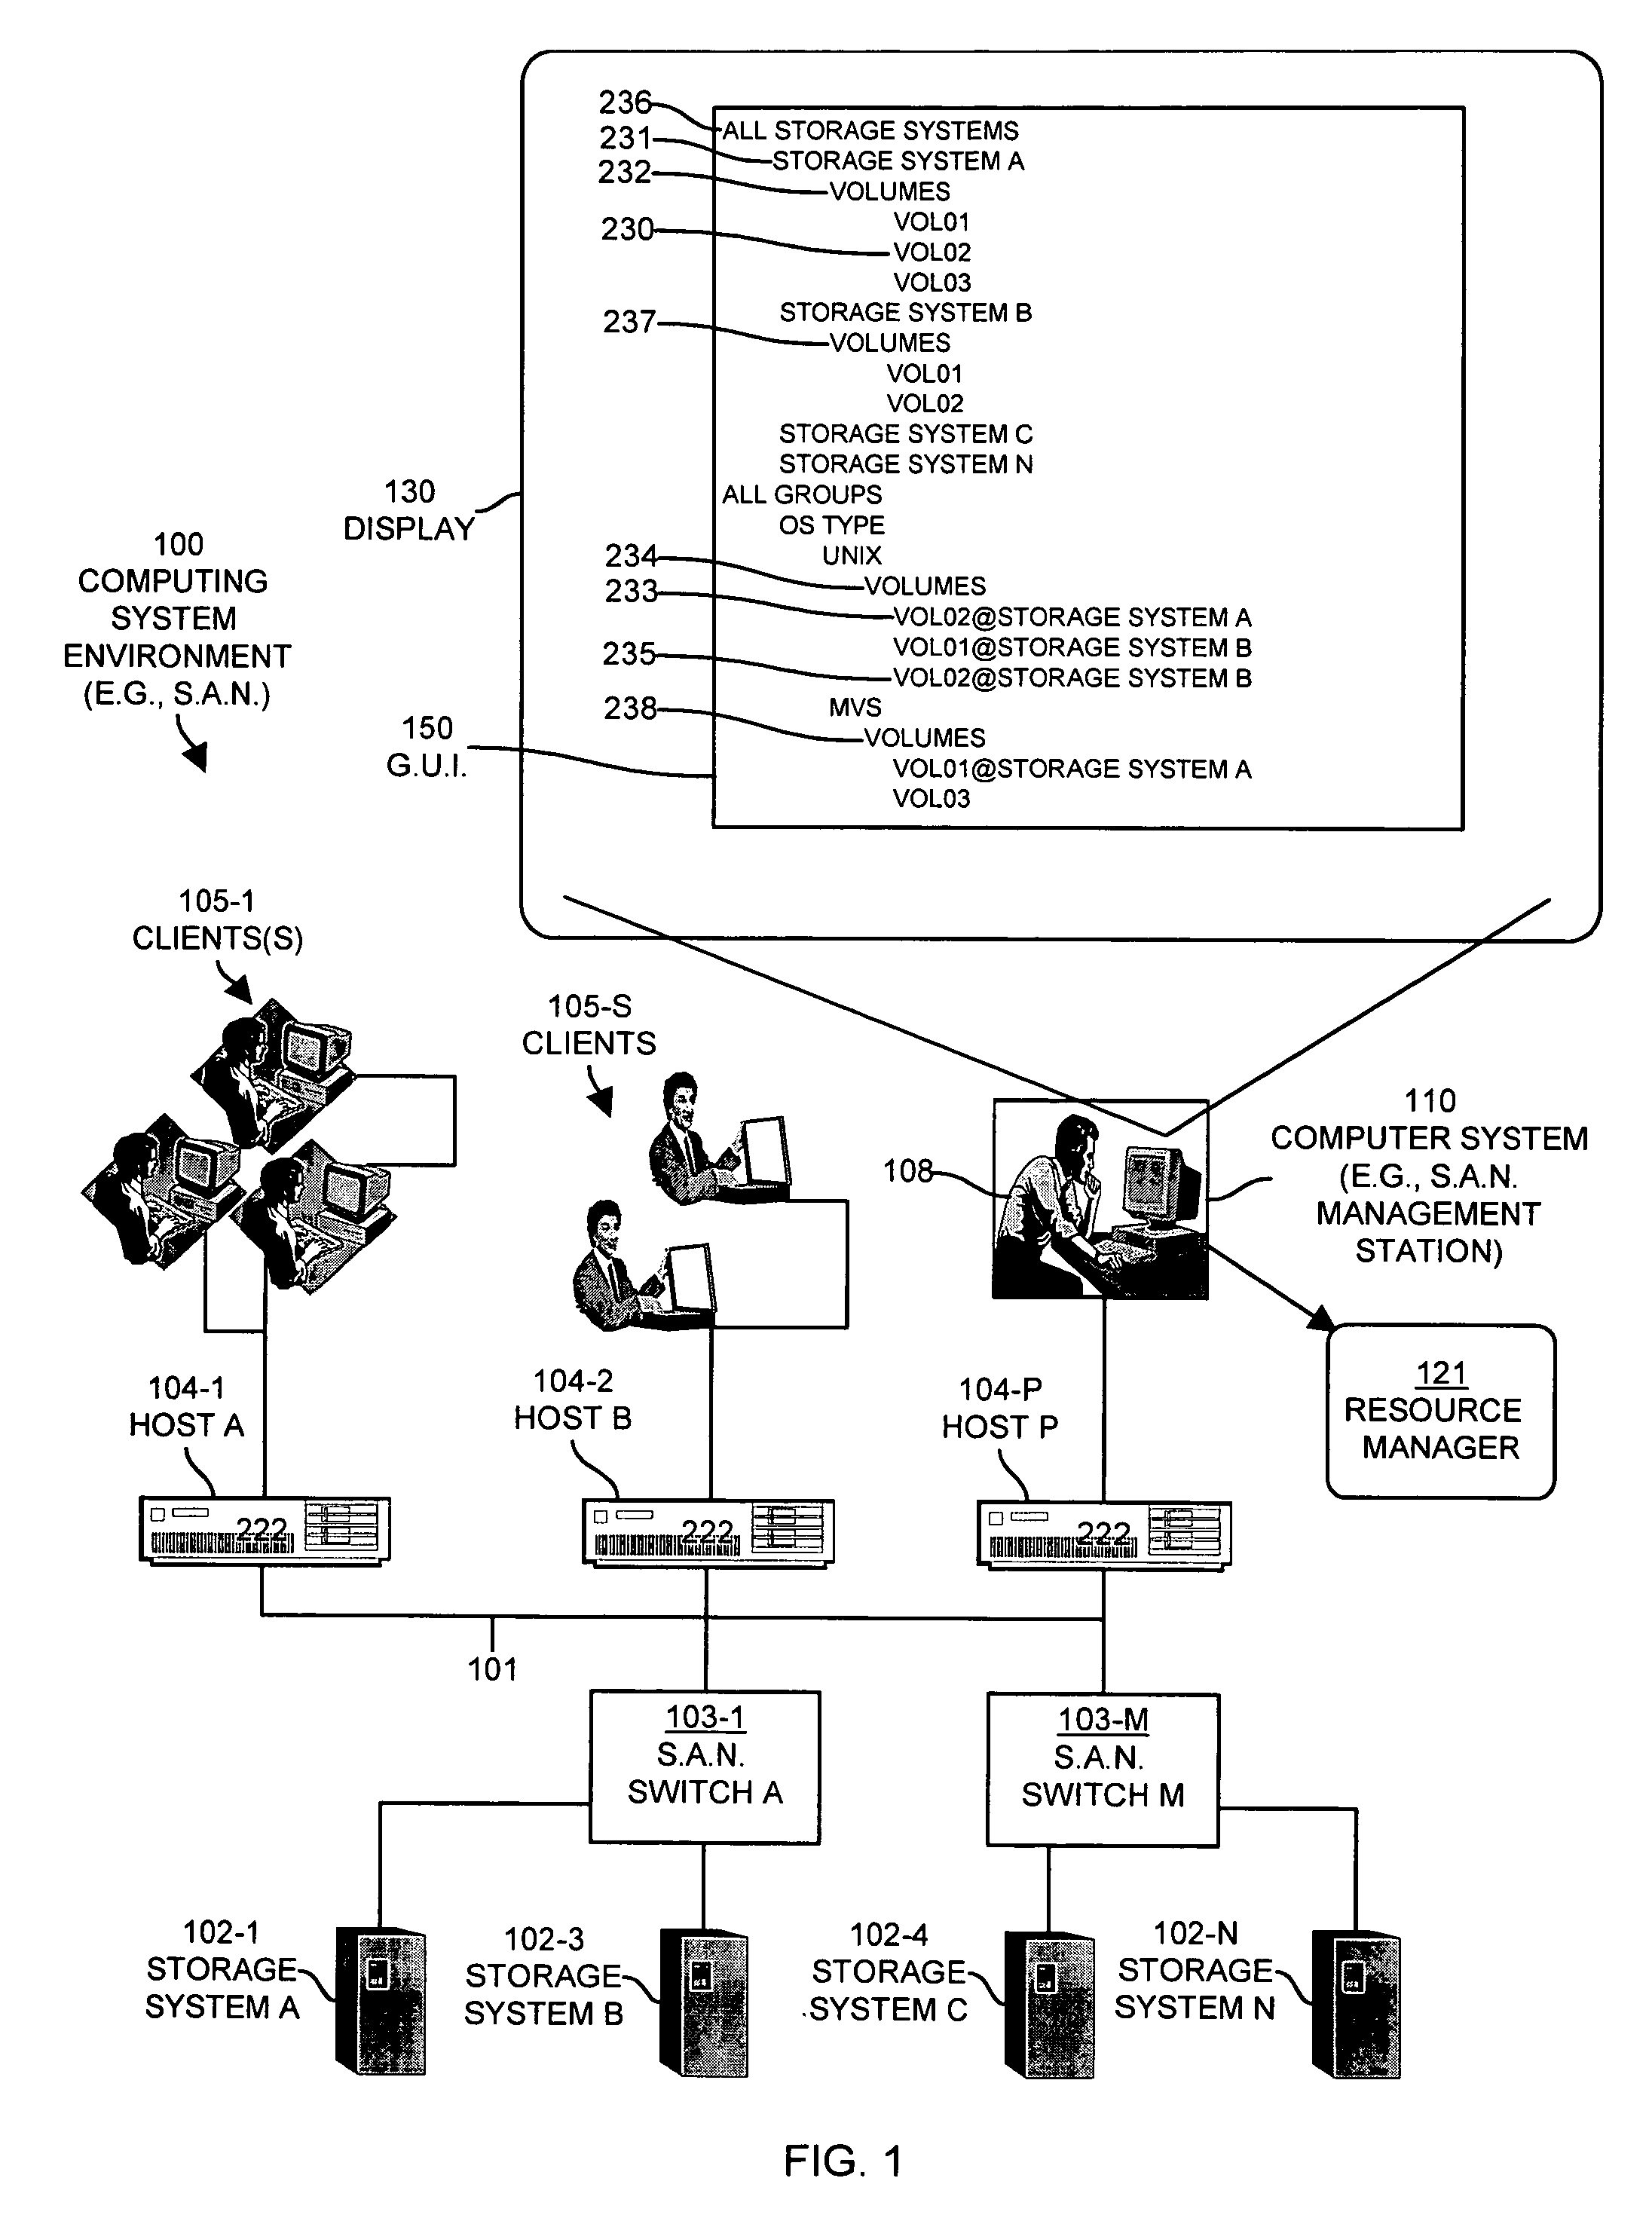 Methods and apparatus for representing resources in a computing system environment